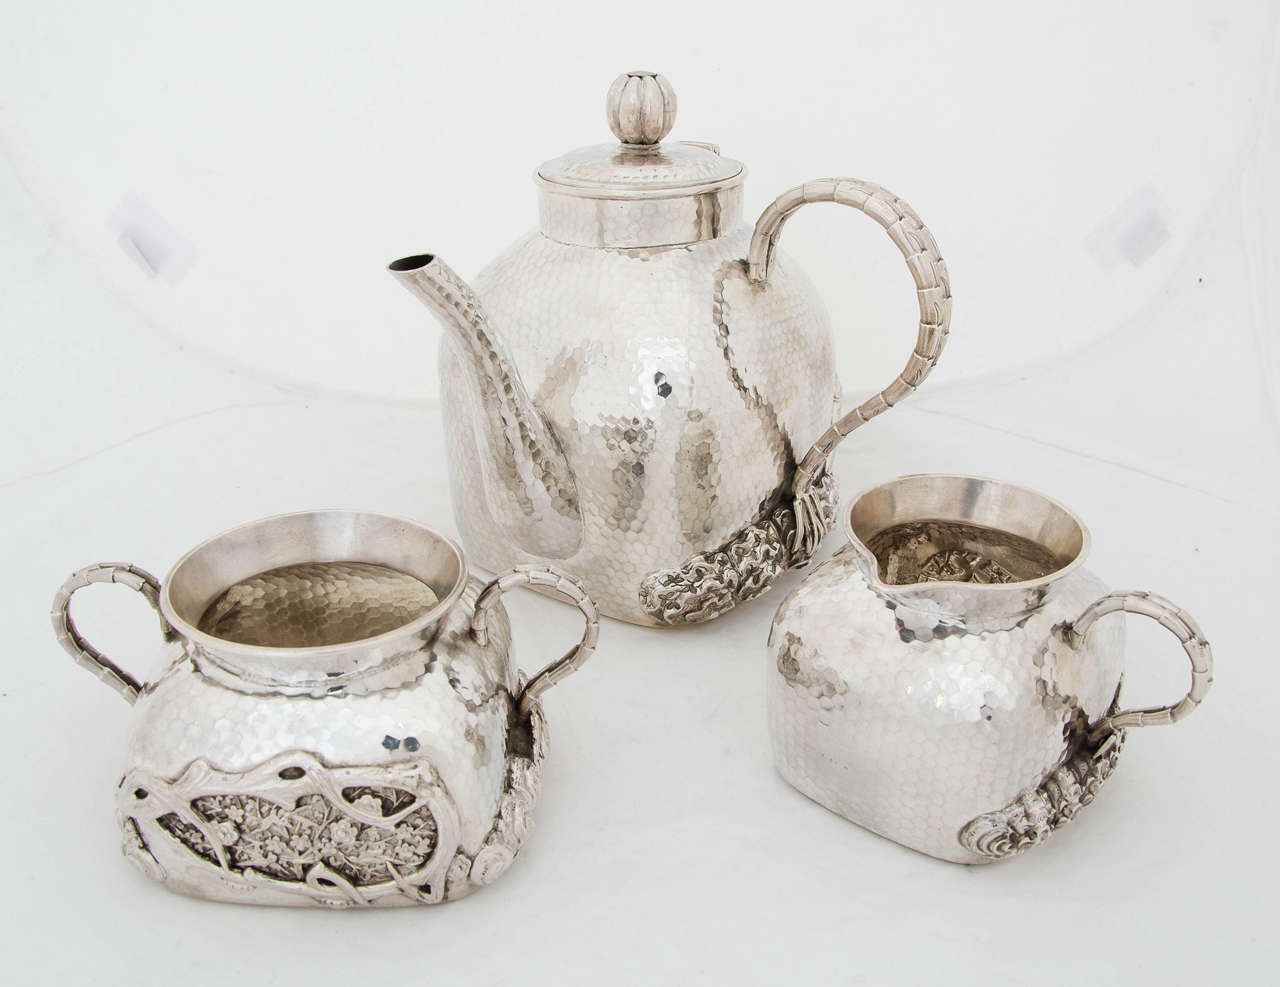 A fine antique silver Chinese silver 3 piece teaset with floral and tree bark decoration on a hammered background.
The teaset was made by Tu Mao Xing, Jiujiang, circa 1895.
Total weight is 1291 gms.